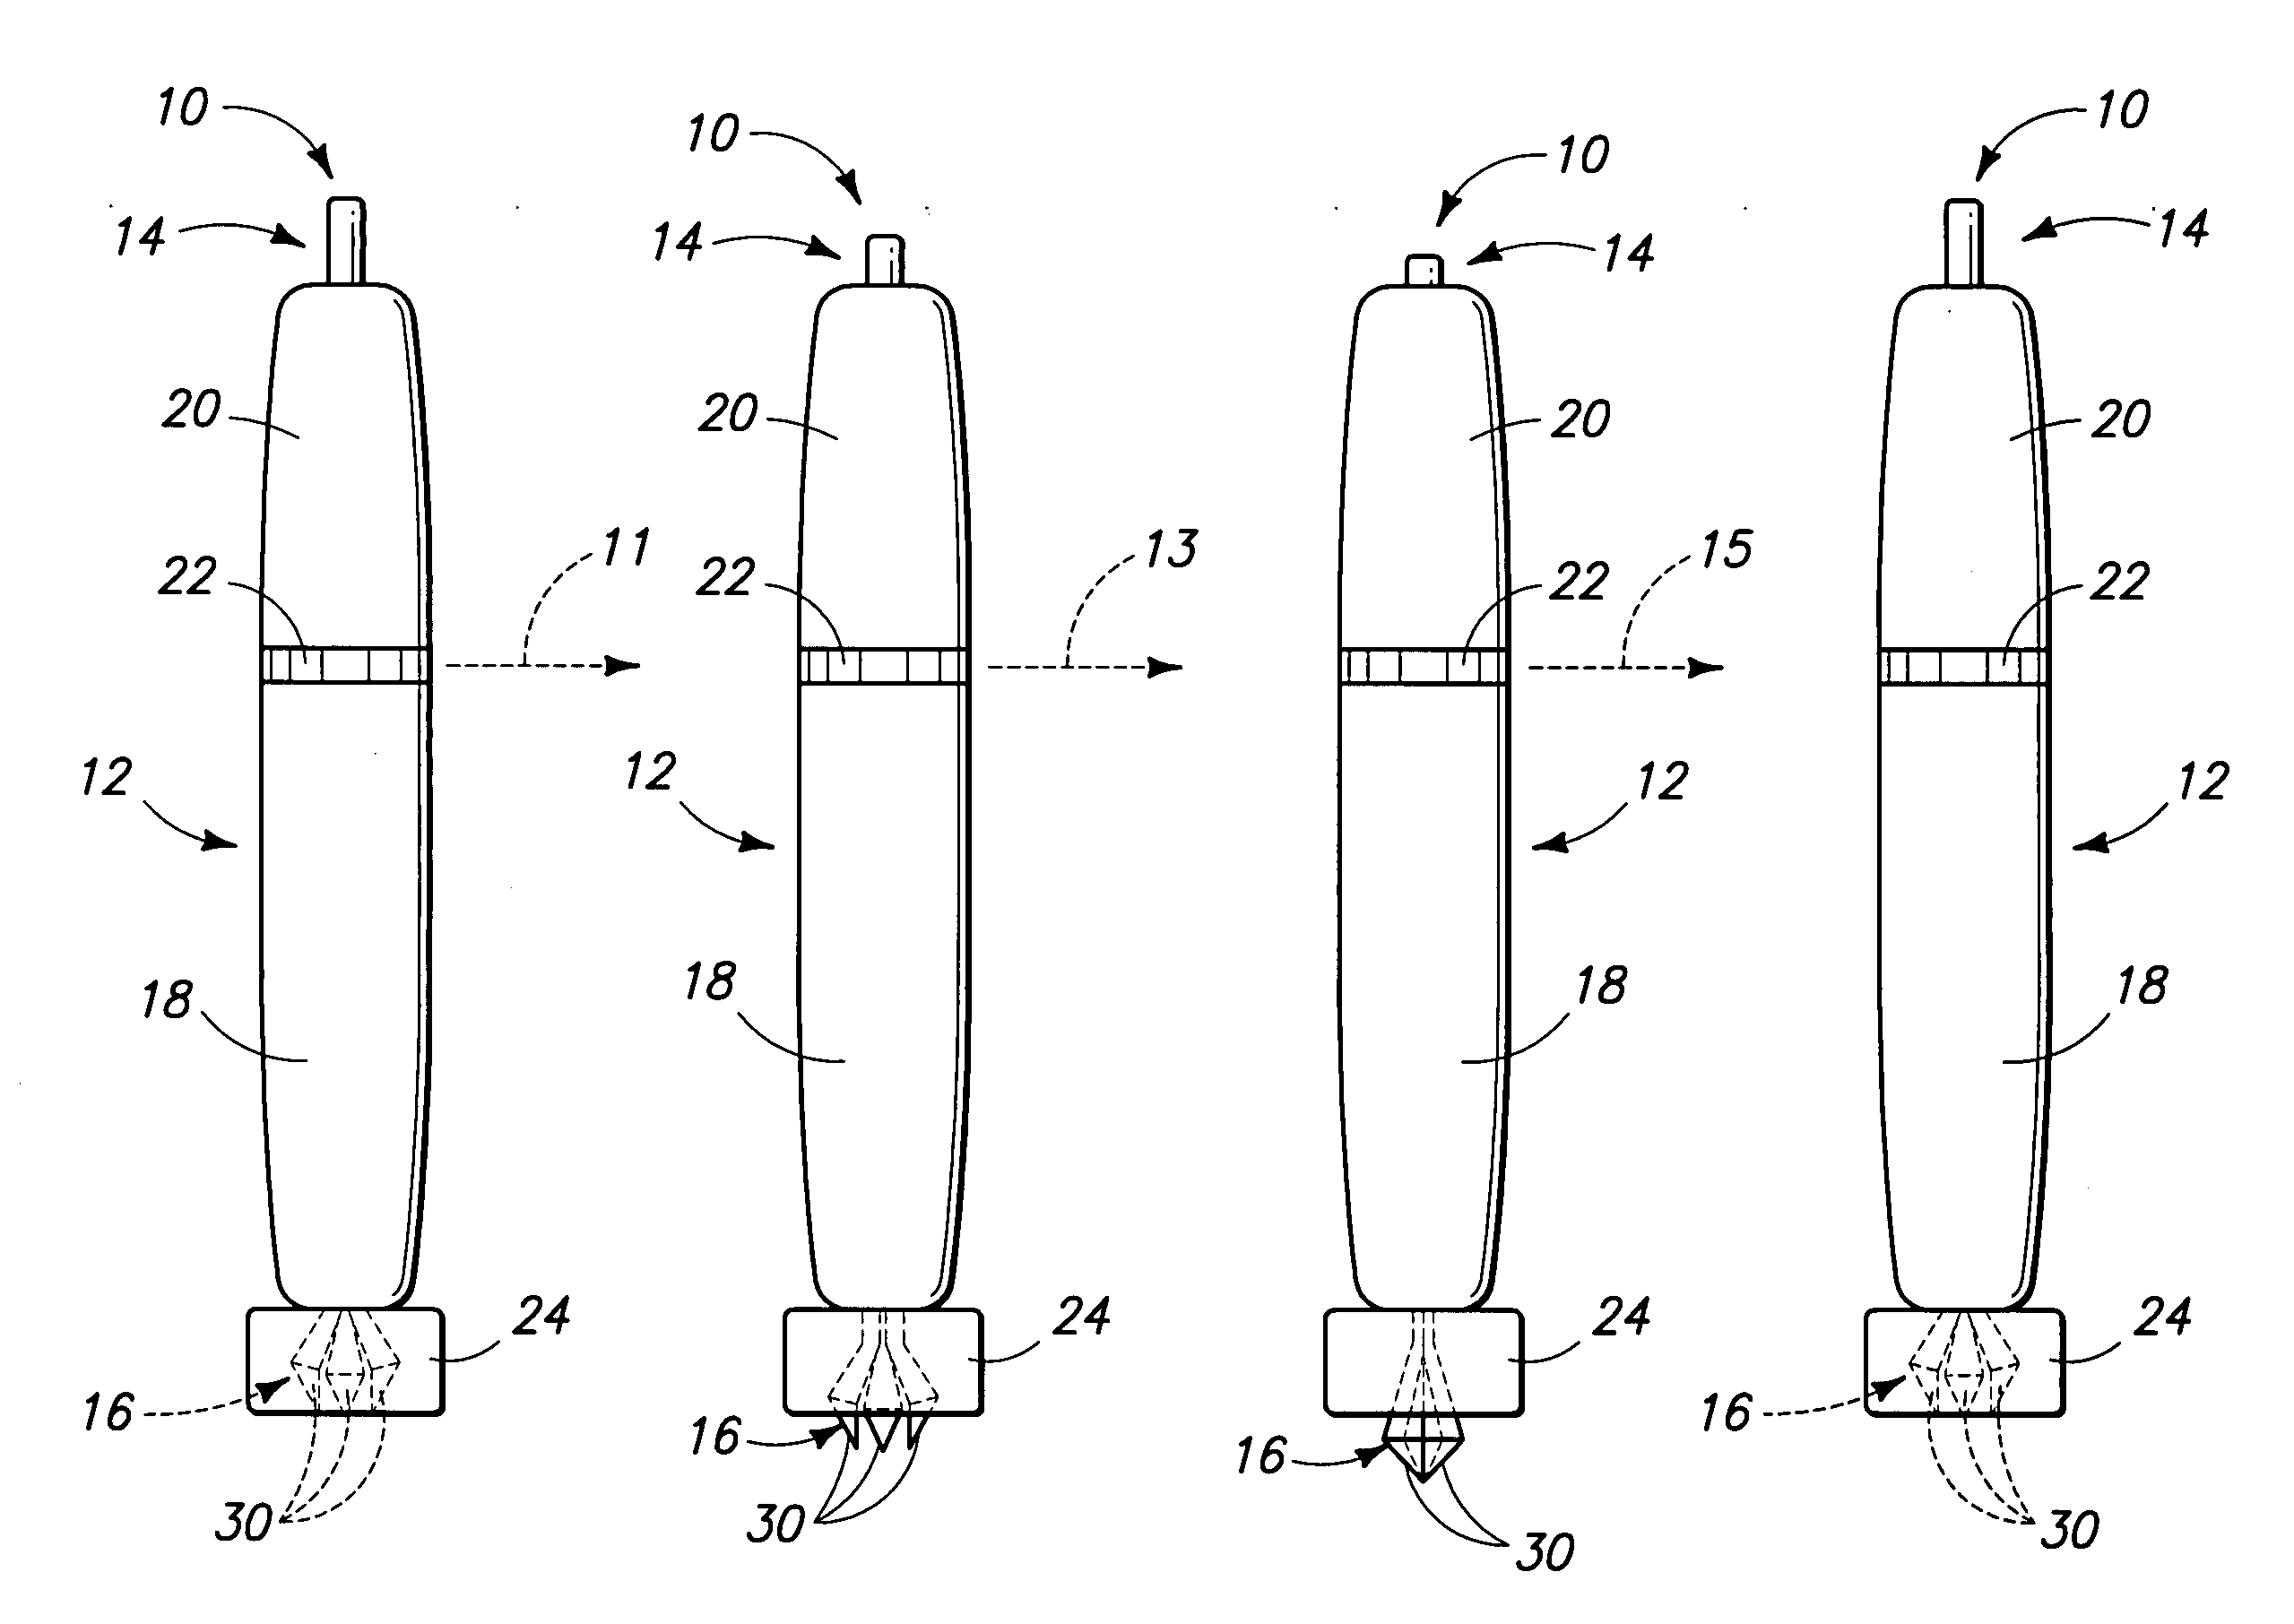 Skin Biopsy Devices, Kits Containing Skin Biopsy Device, and Methods of Obtaining a Skin Biopsy